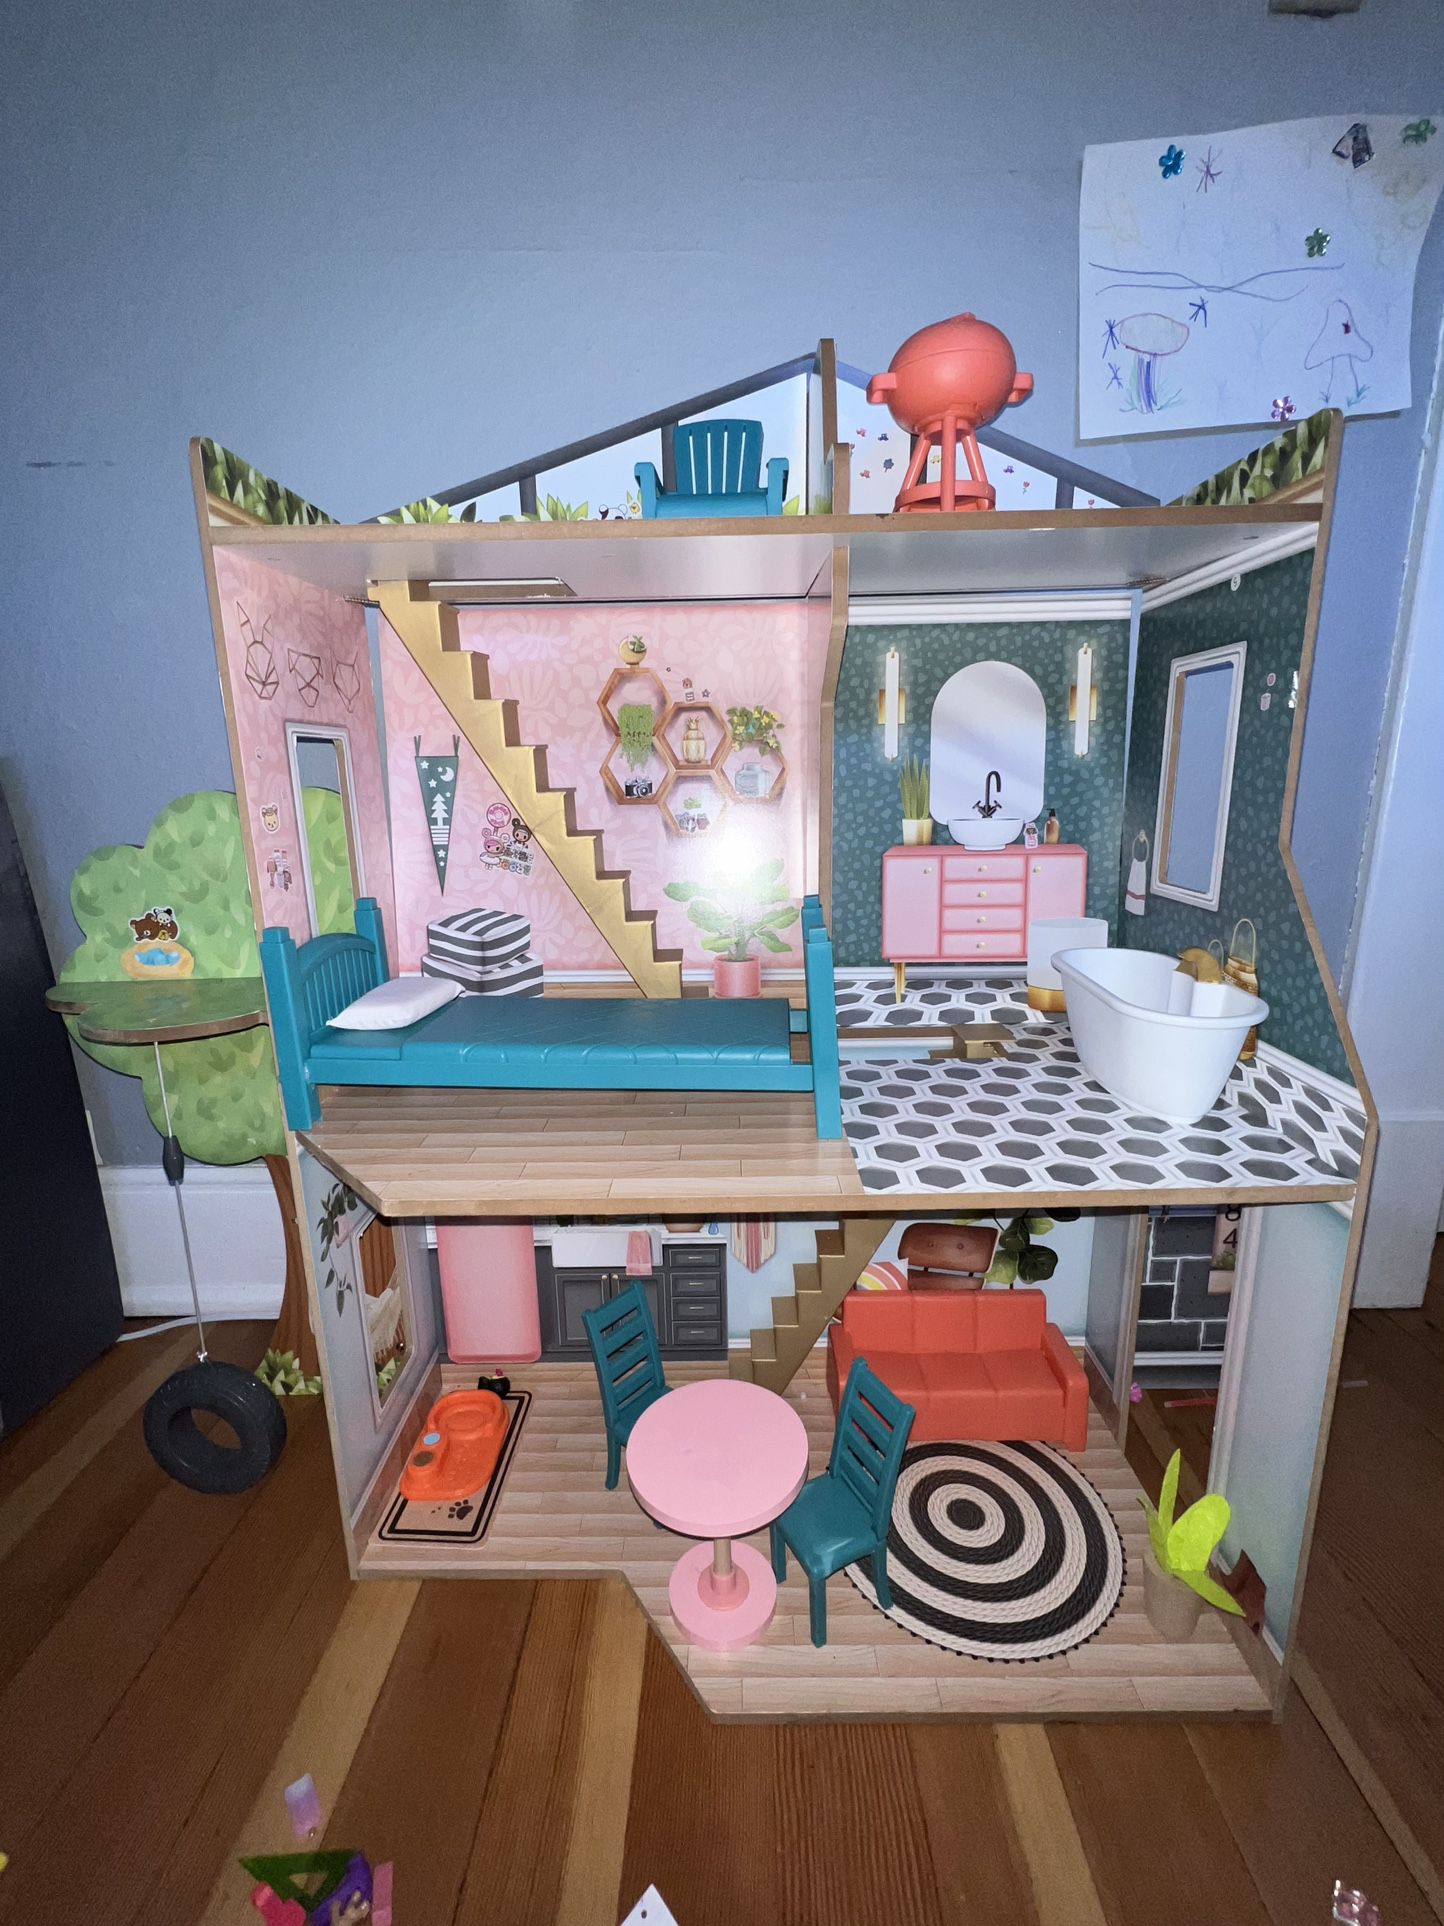 Doll House - Free!